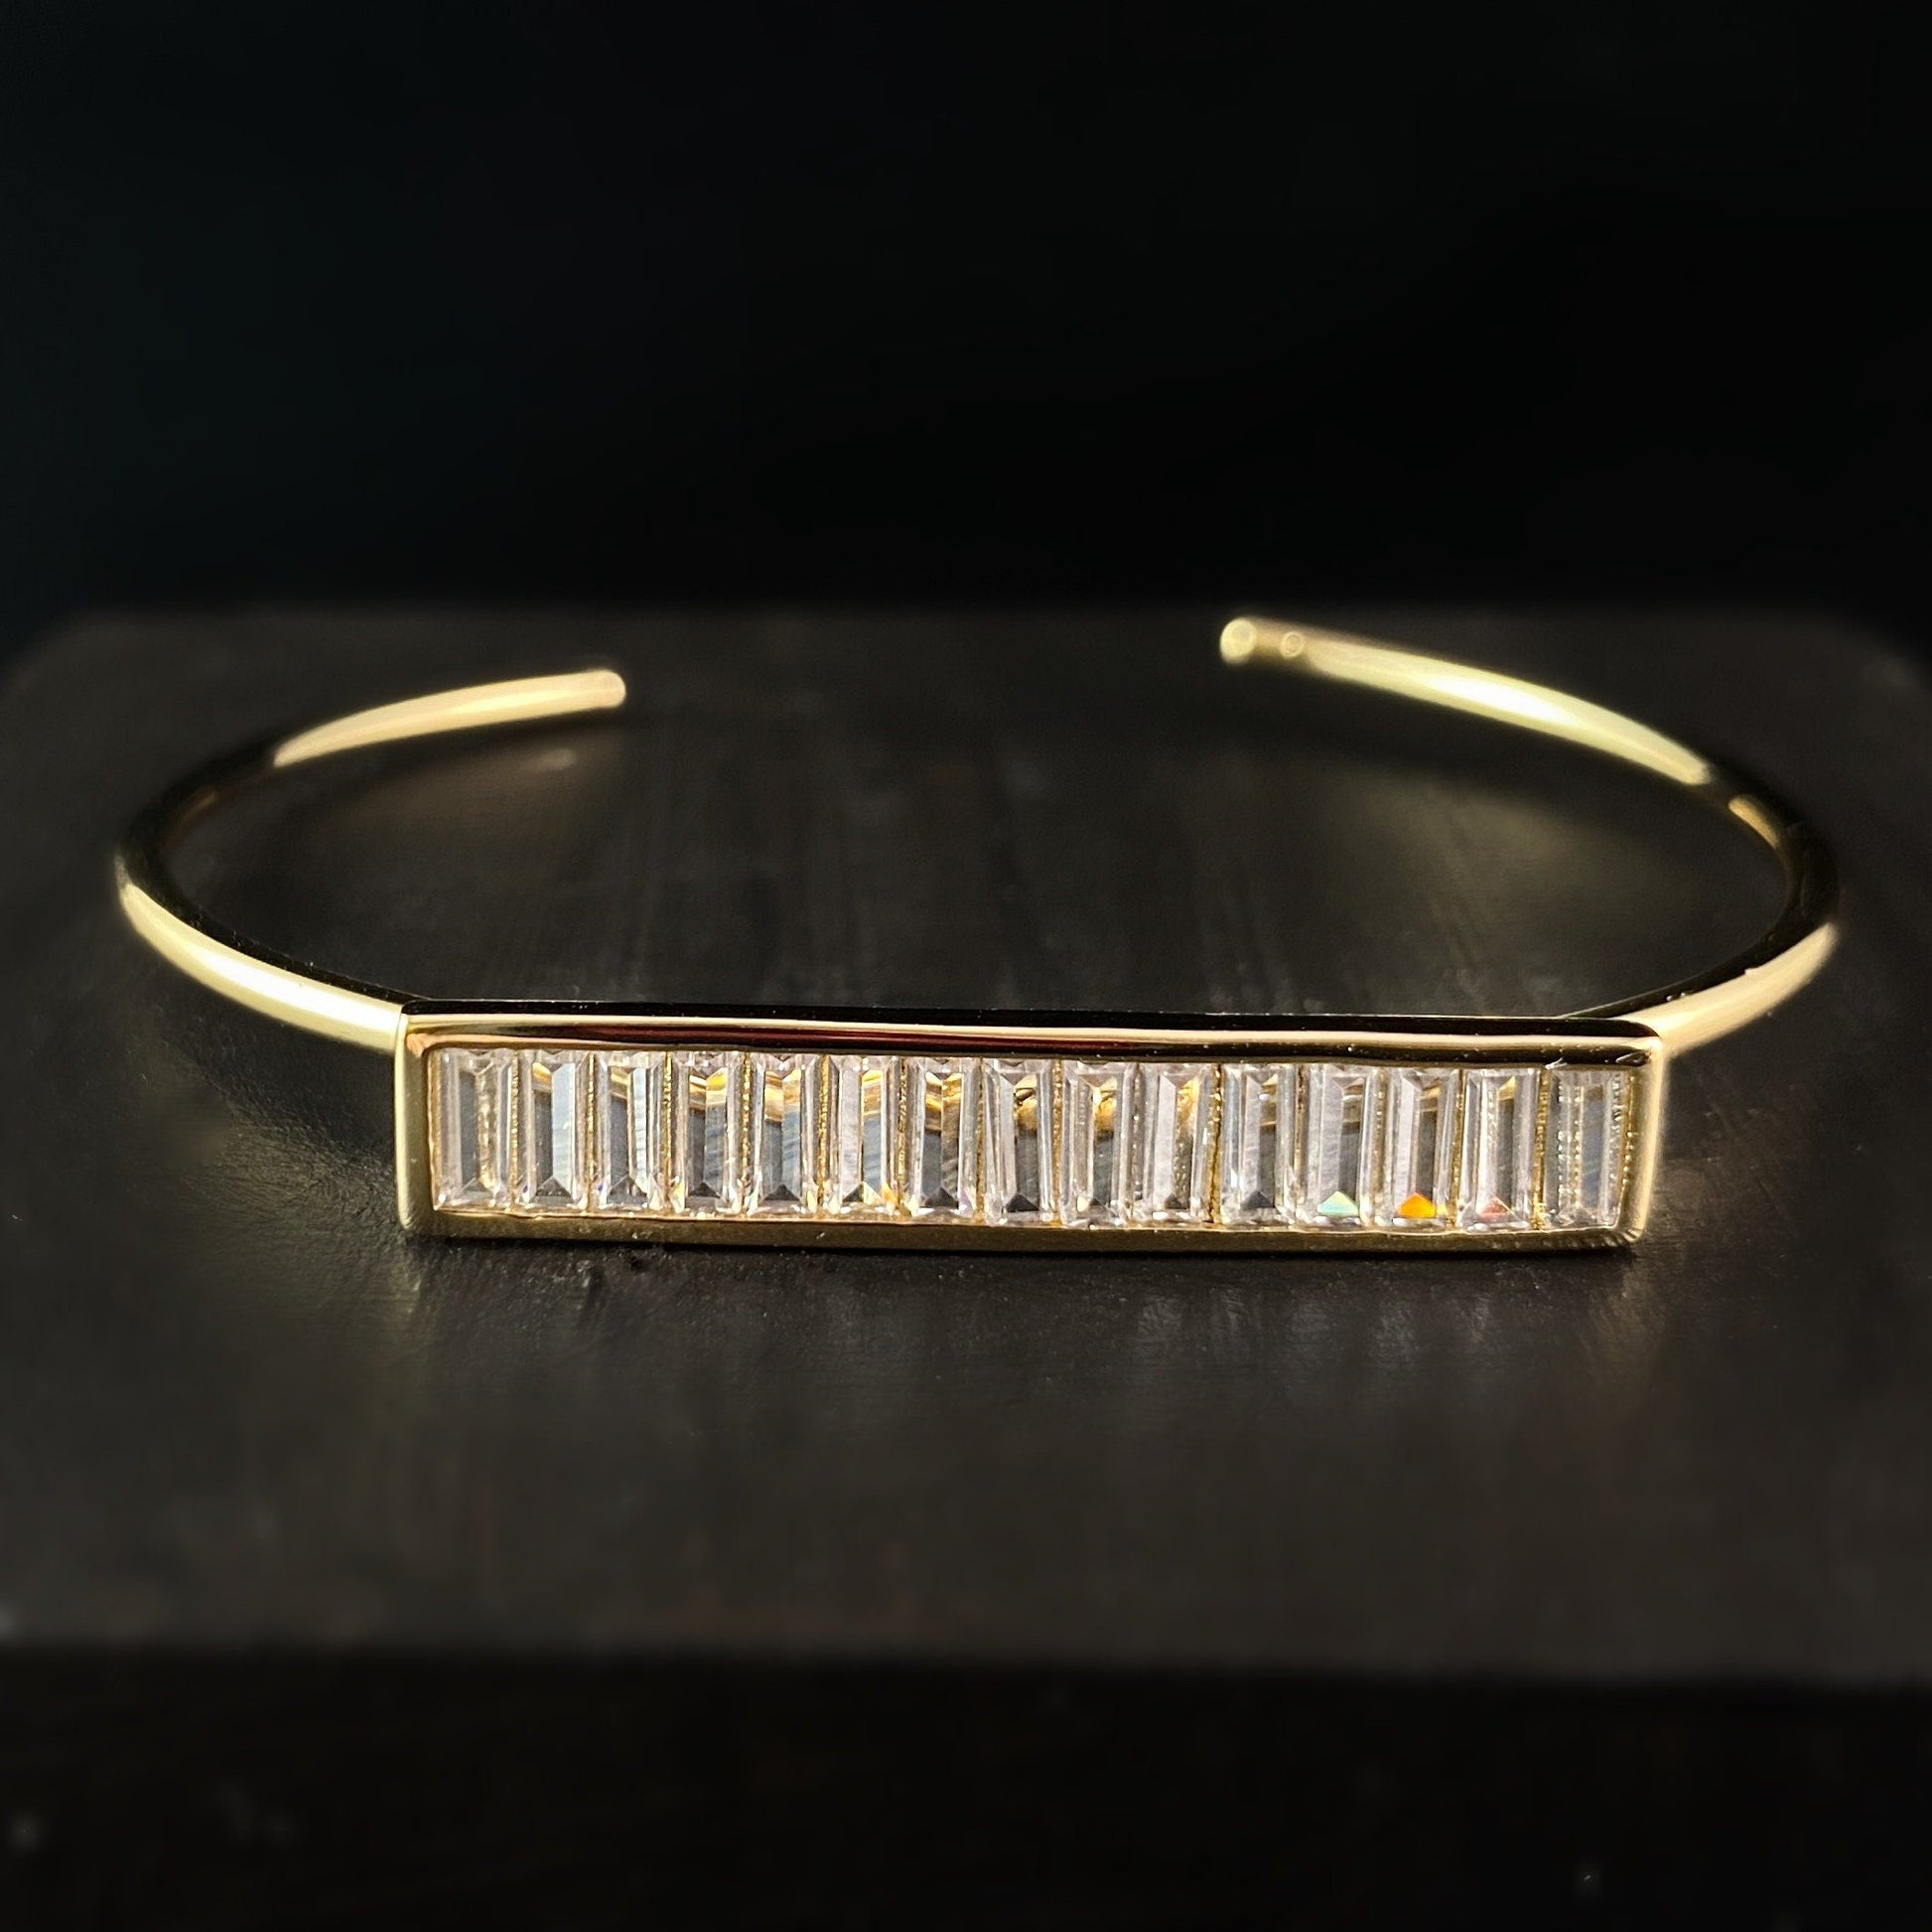 1920s Style Gold Cuff with Channel Set Baguette Stones - Ray of Light